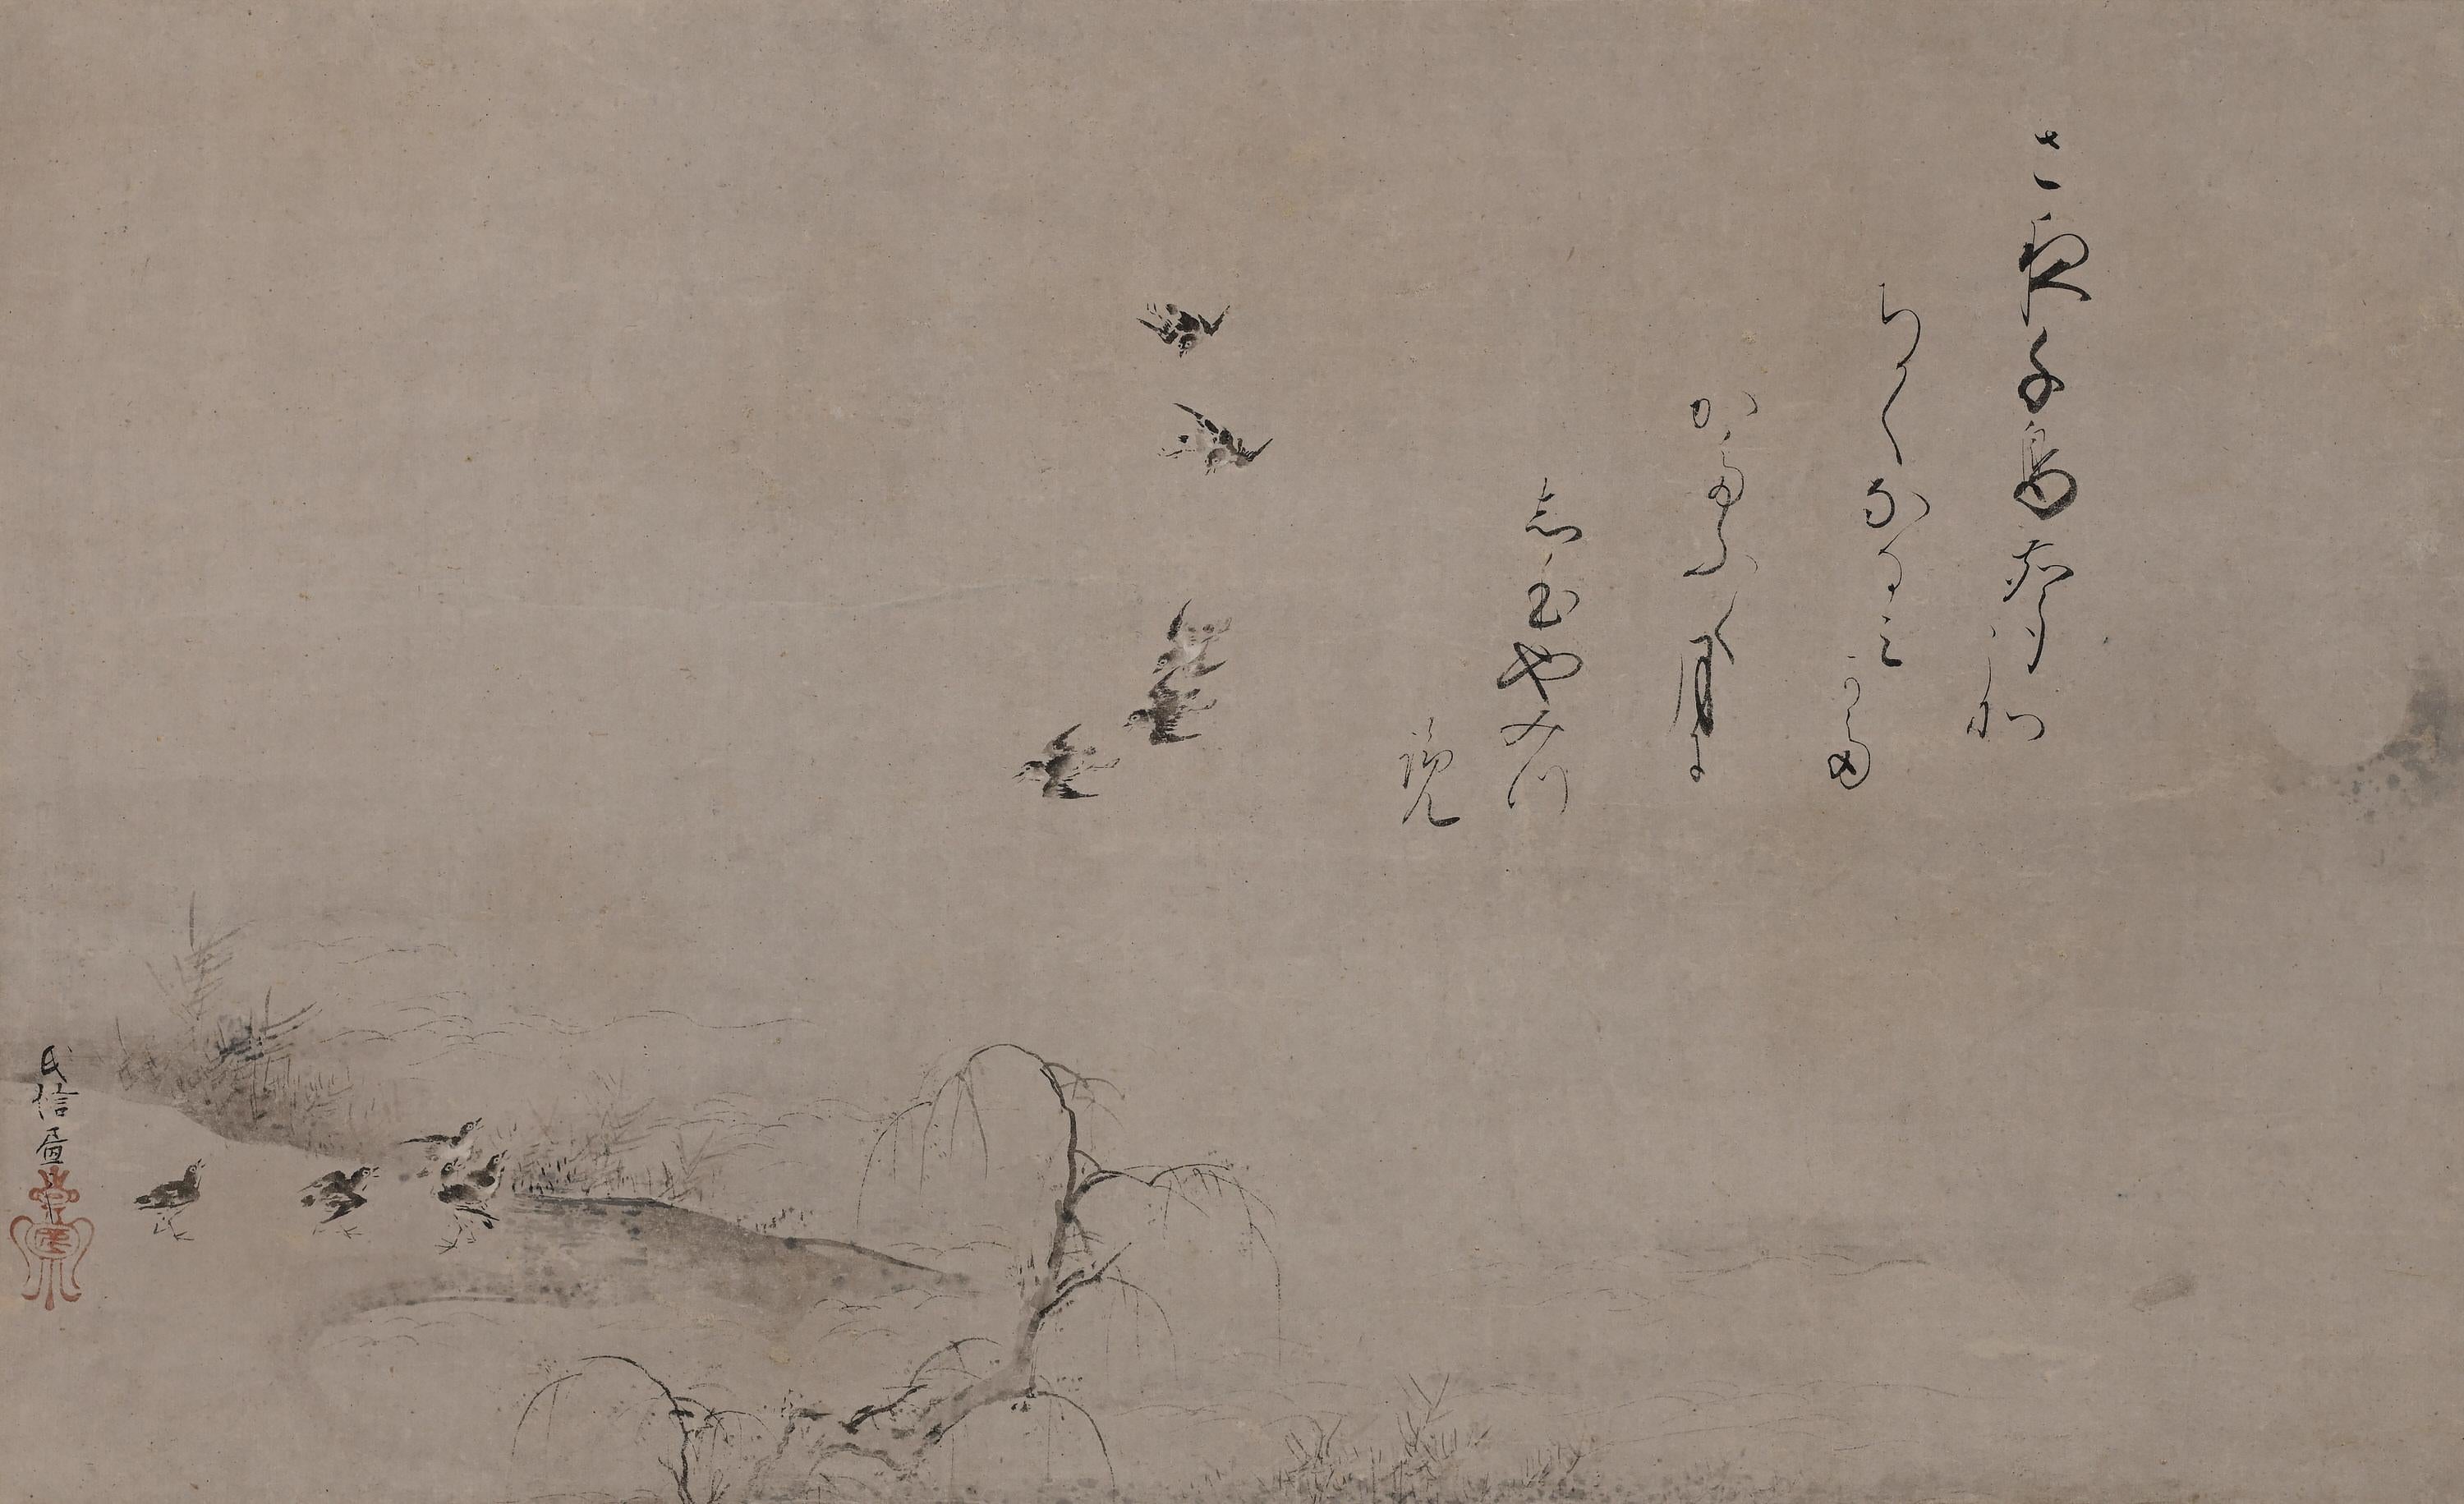 Plovers in Moonlight
Kano Ujinobu (1616-1669)
Mid 17th century
Ink and gofun on paper

A mid 17th century Japanese scroll painting by the Kano school artist Kano Ujinobu, inspired by court painters of the Southern Song era (1127-1279). An